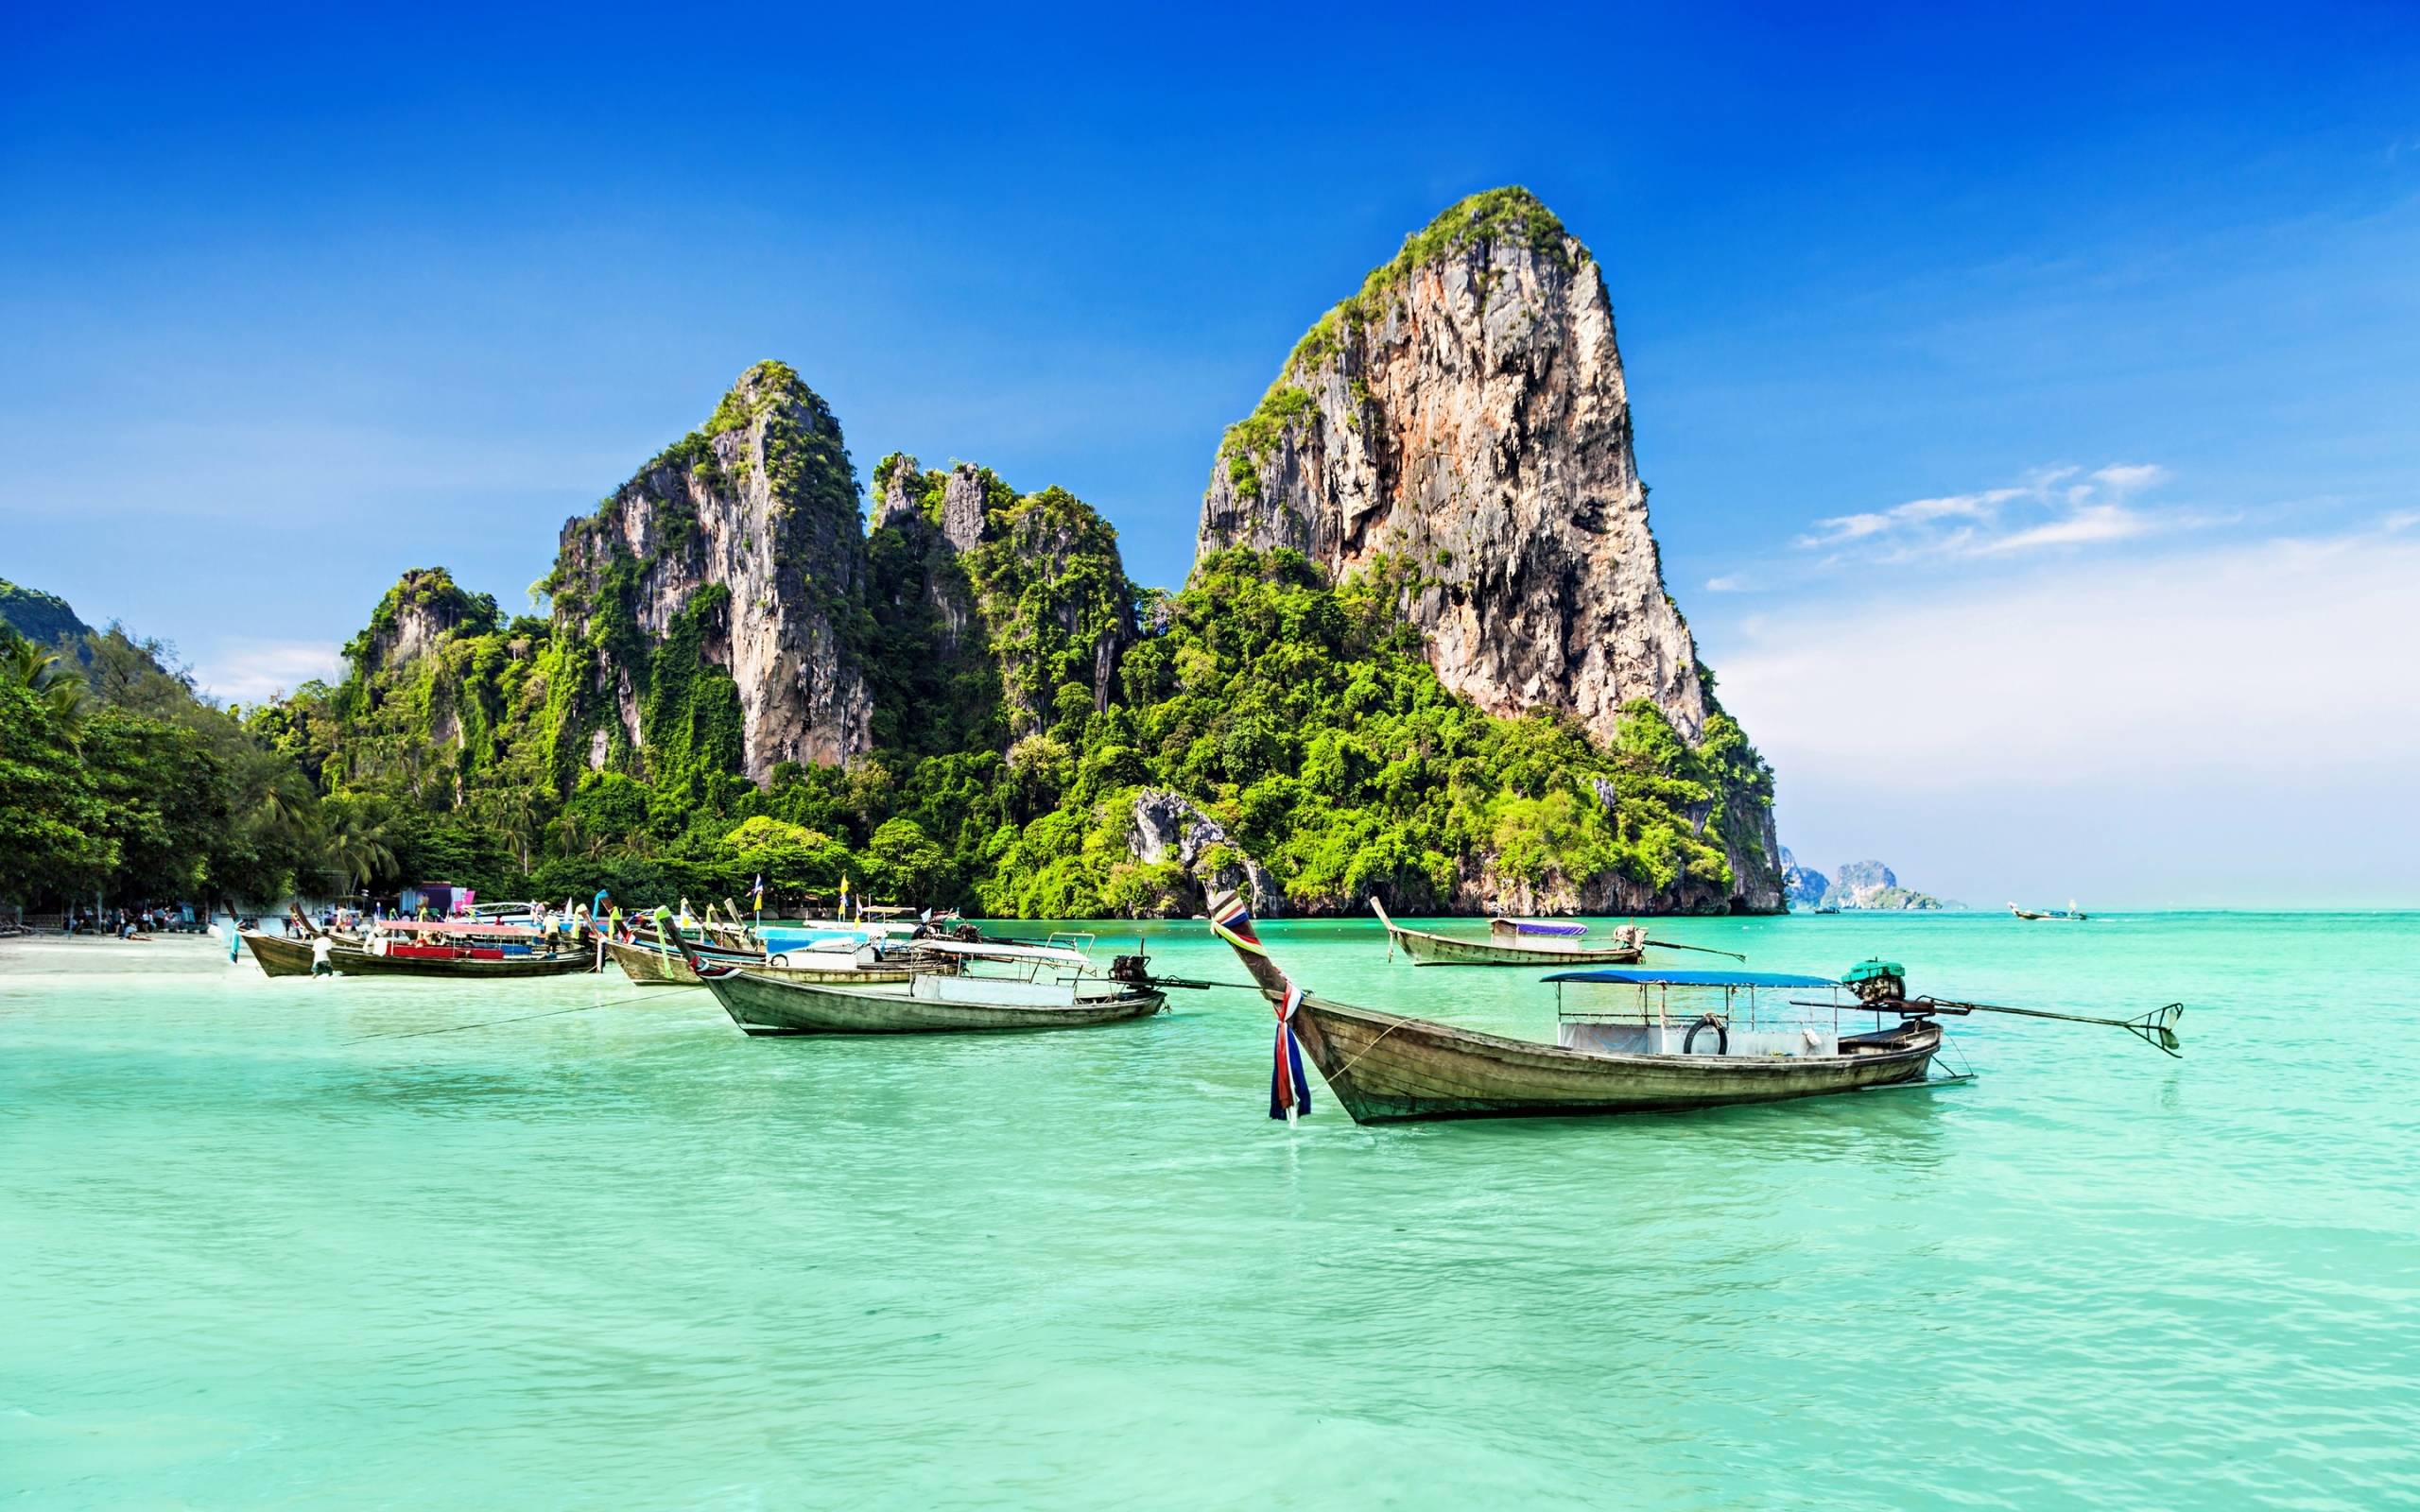 boats in the water with a large rock in the background with Railay Beach in the background